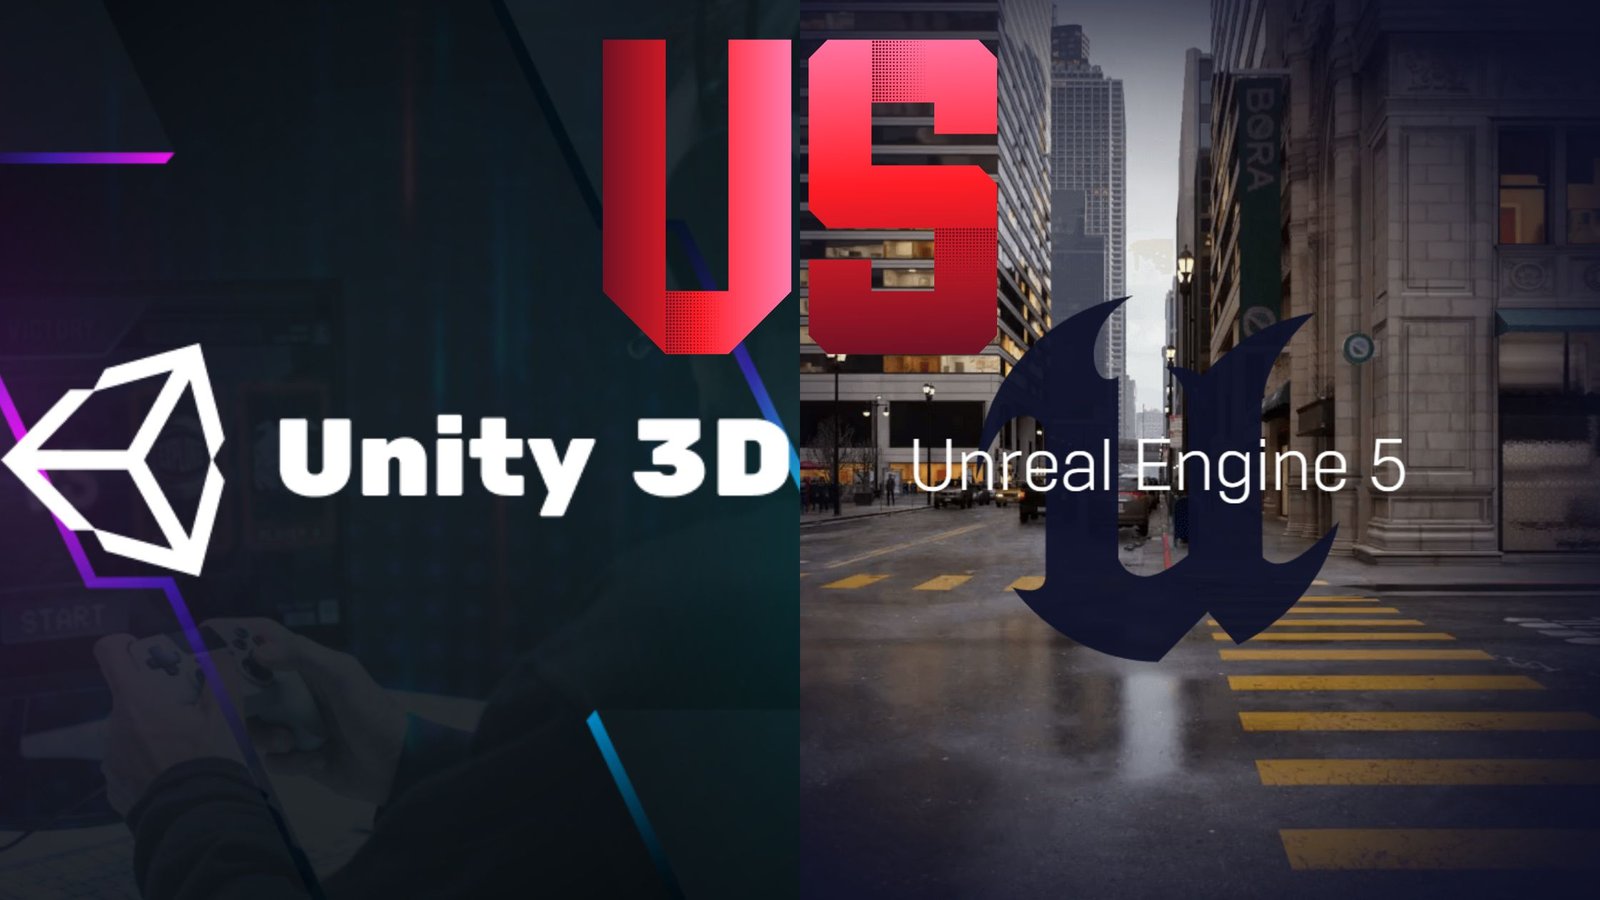 Unity 3d and Unreal Engine 5